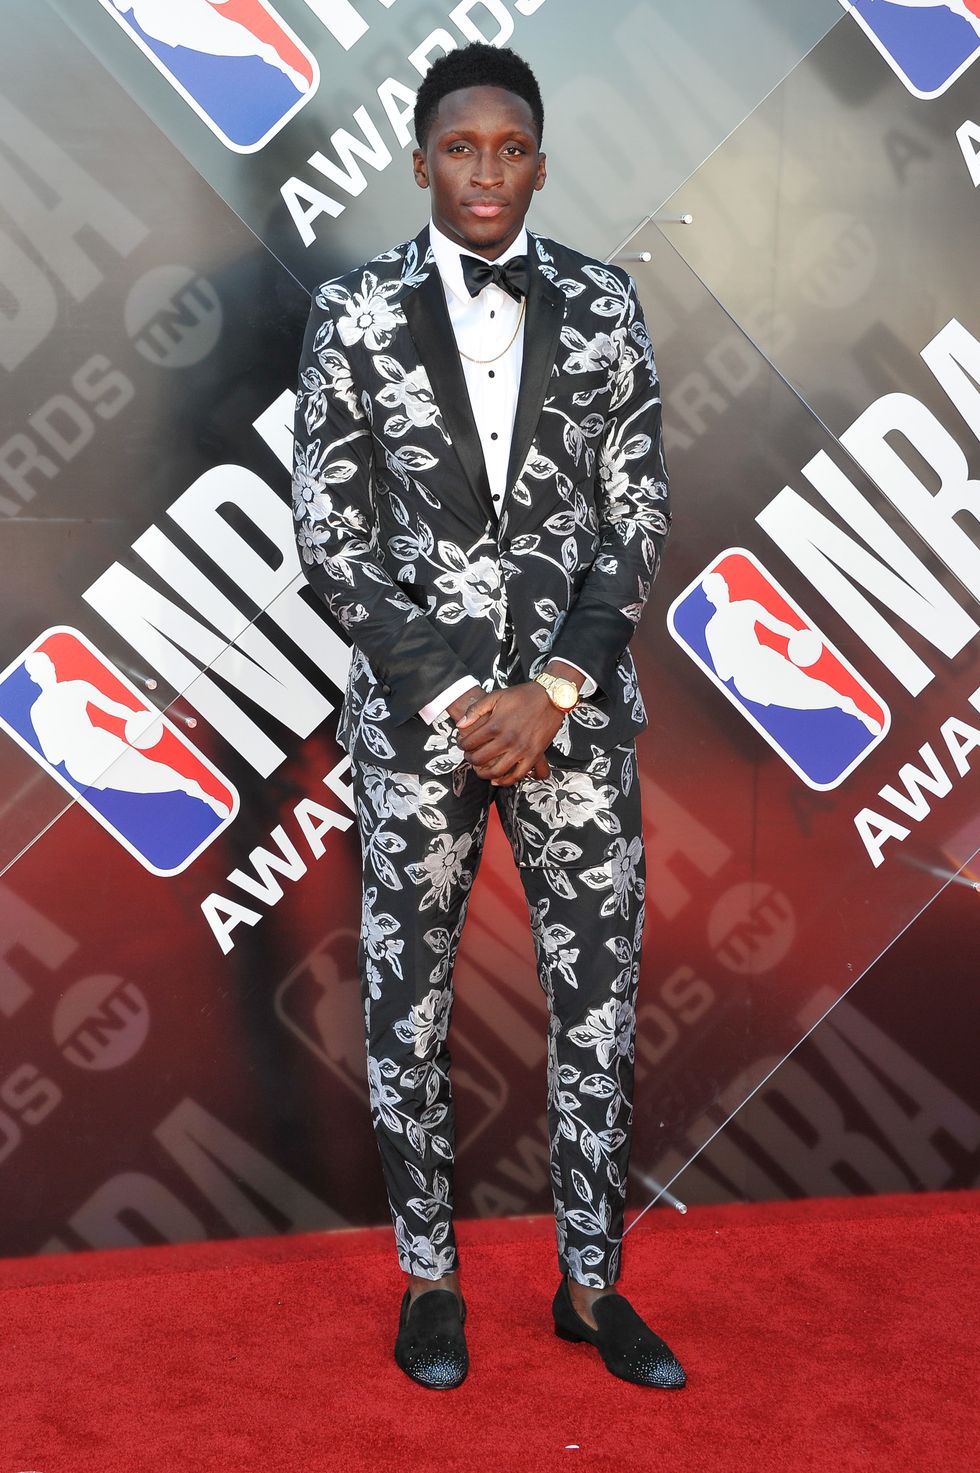 The Best (and Most Completely Over-the-Top) Looks From the NBA Awards